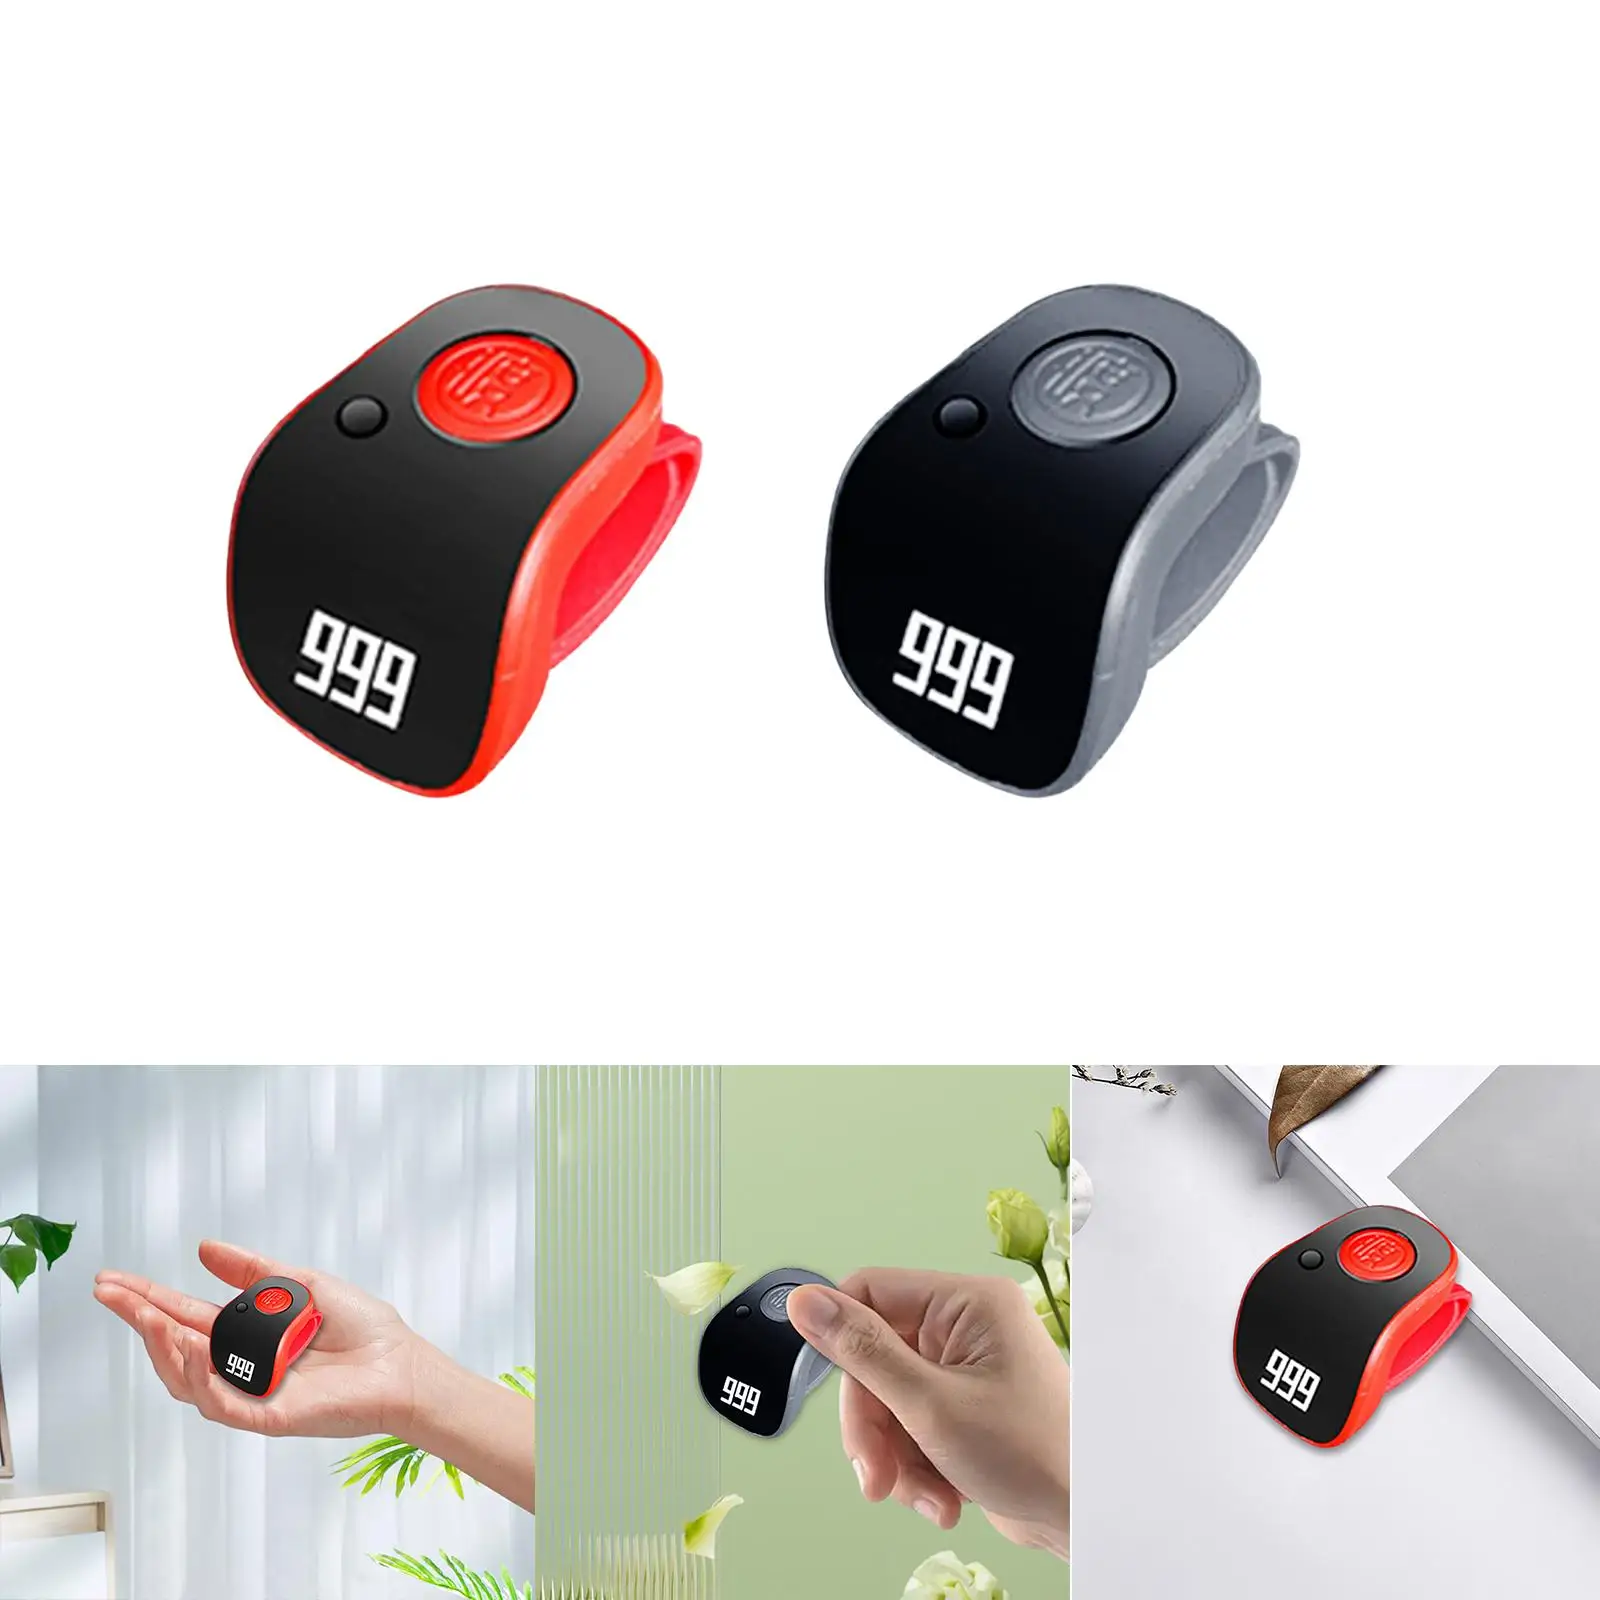 Count Tool Rechargeable Portable Smart Counting Electronic Counter for Office Accessories